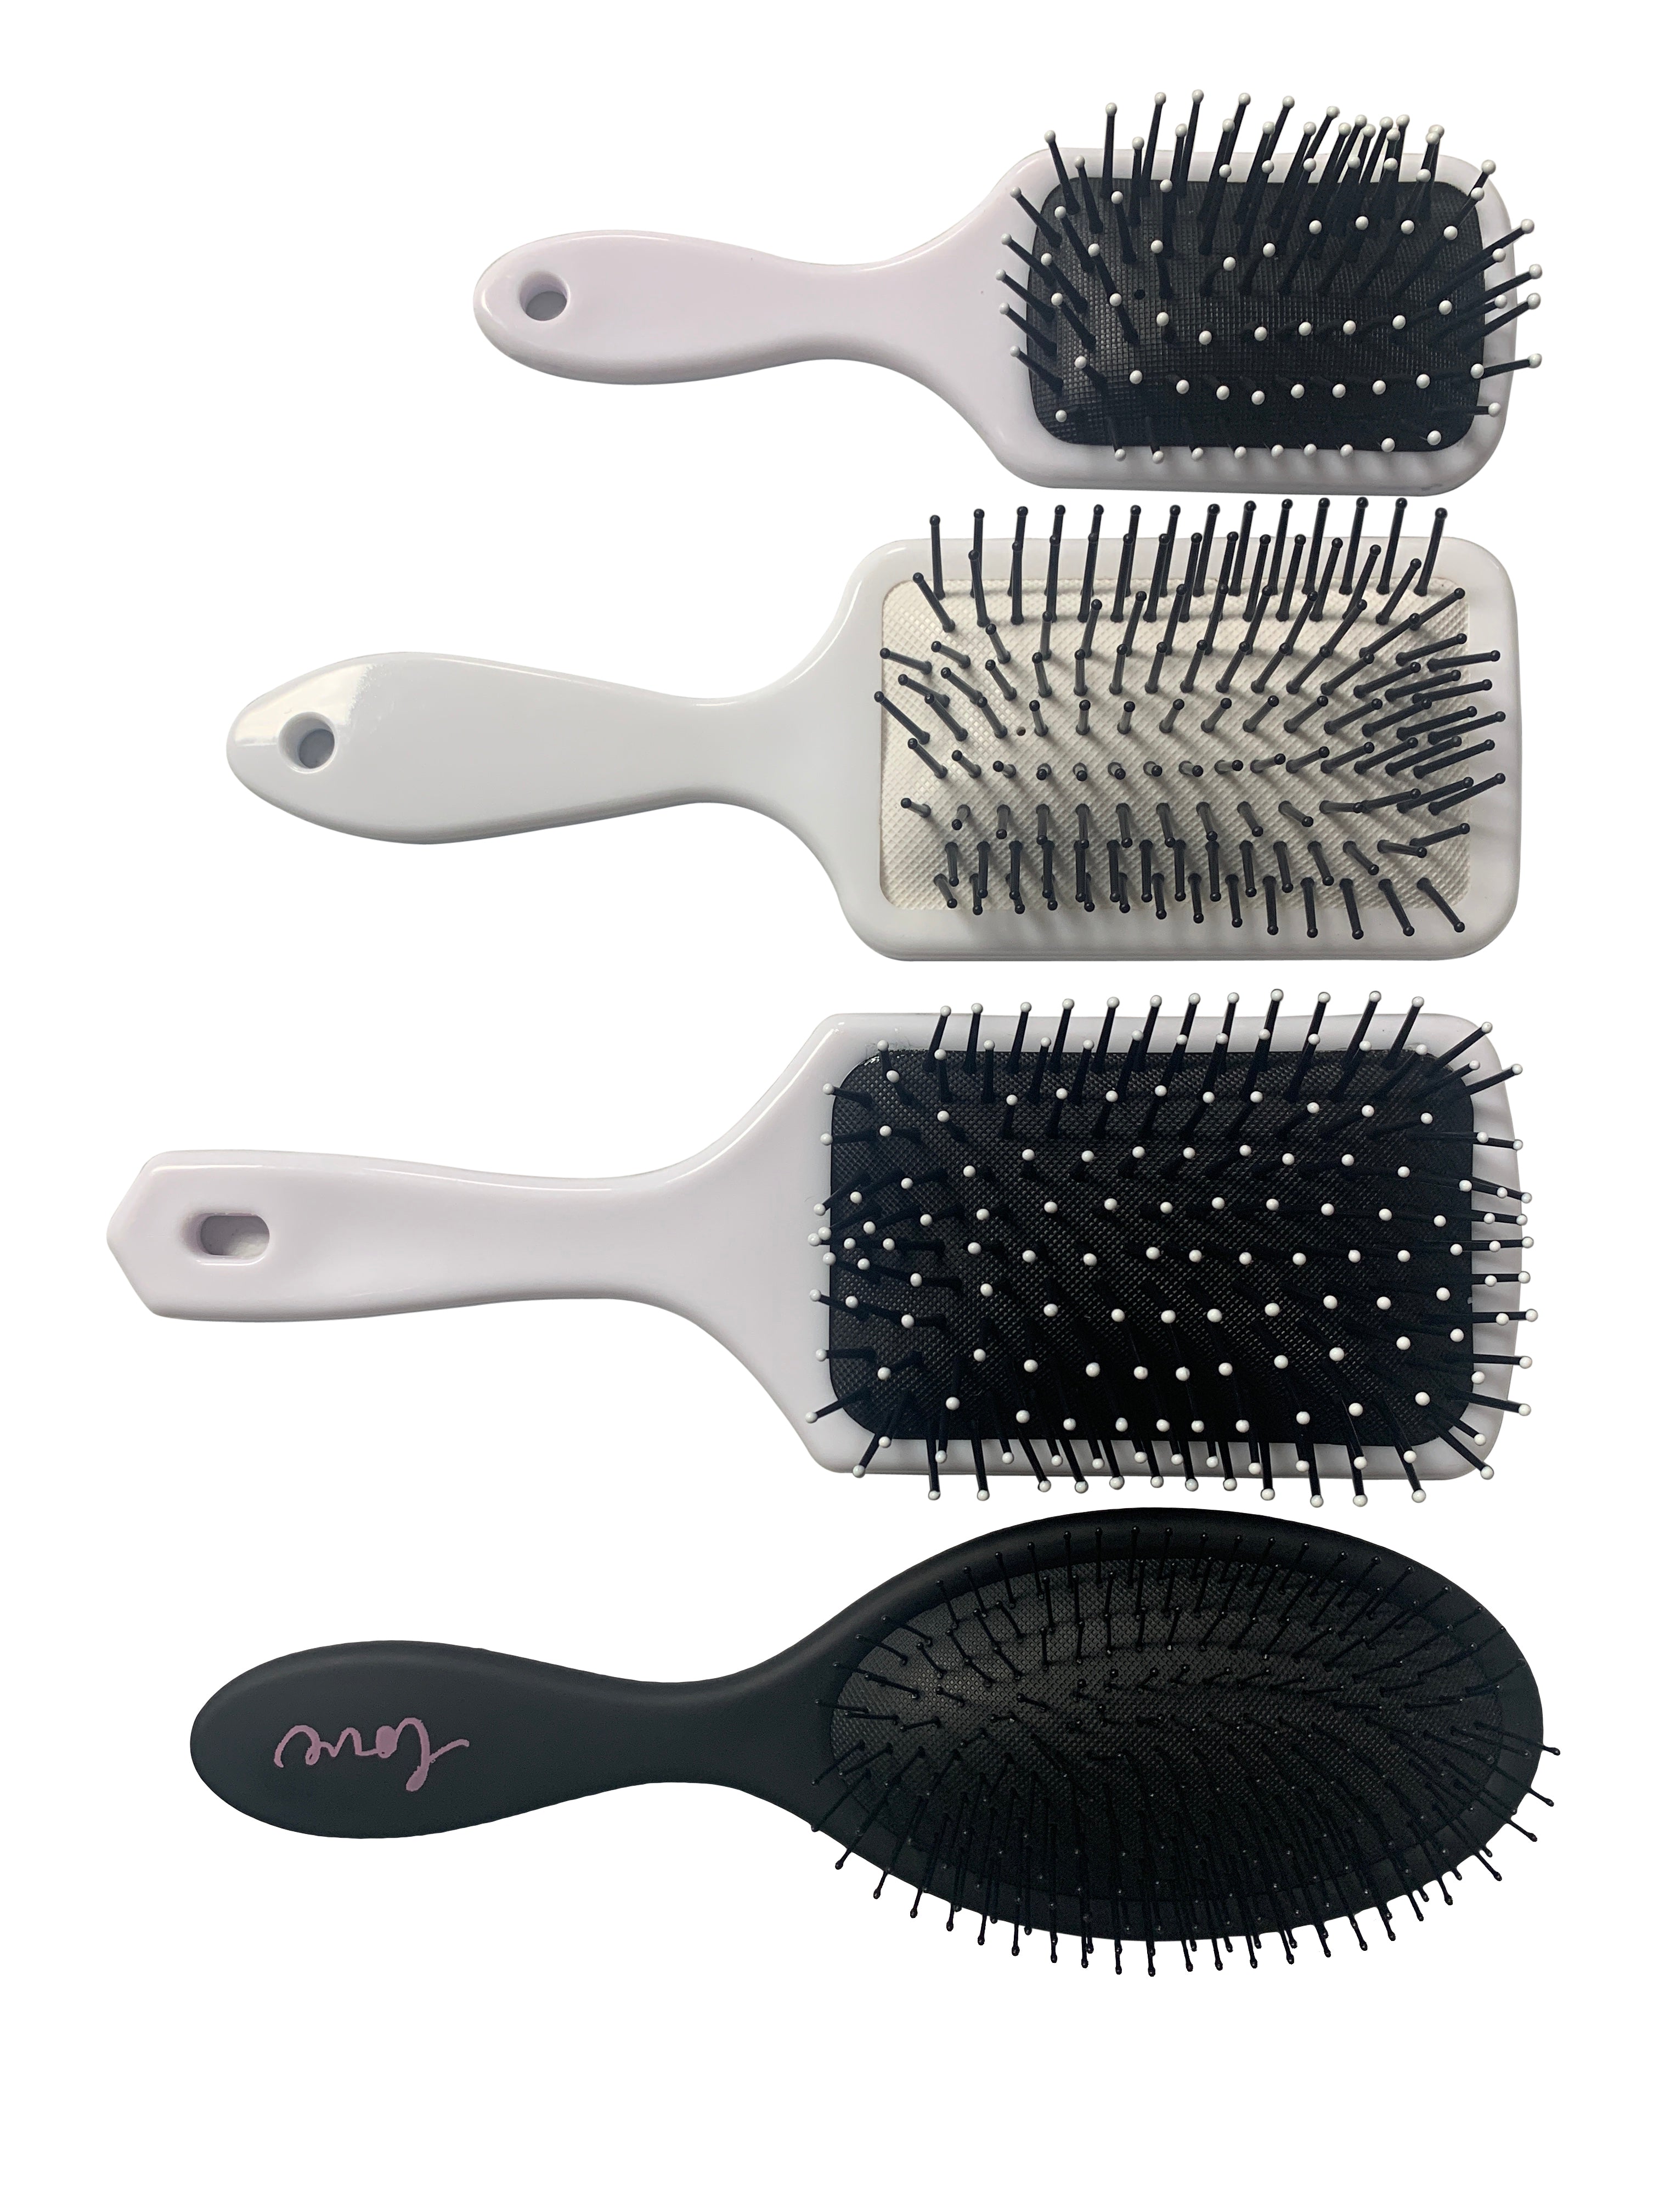 Hair Brushes white gold silver black perfect gift, school, camp